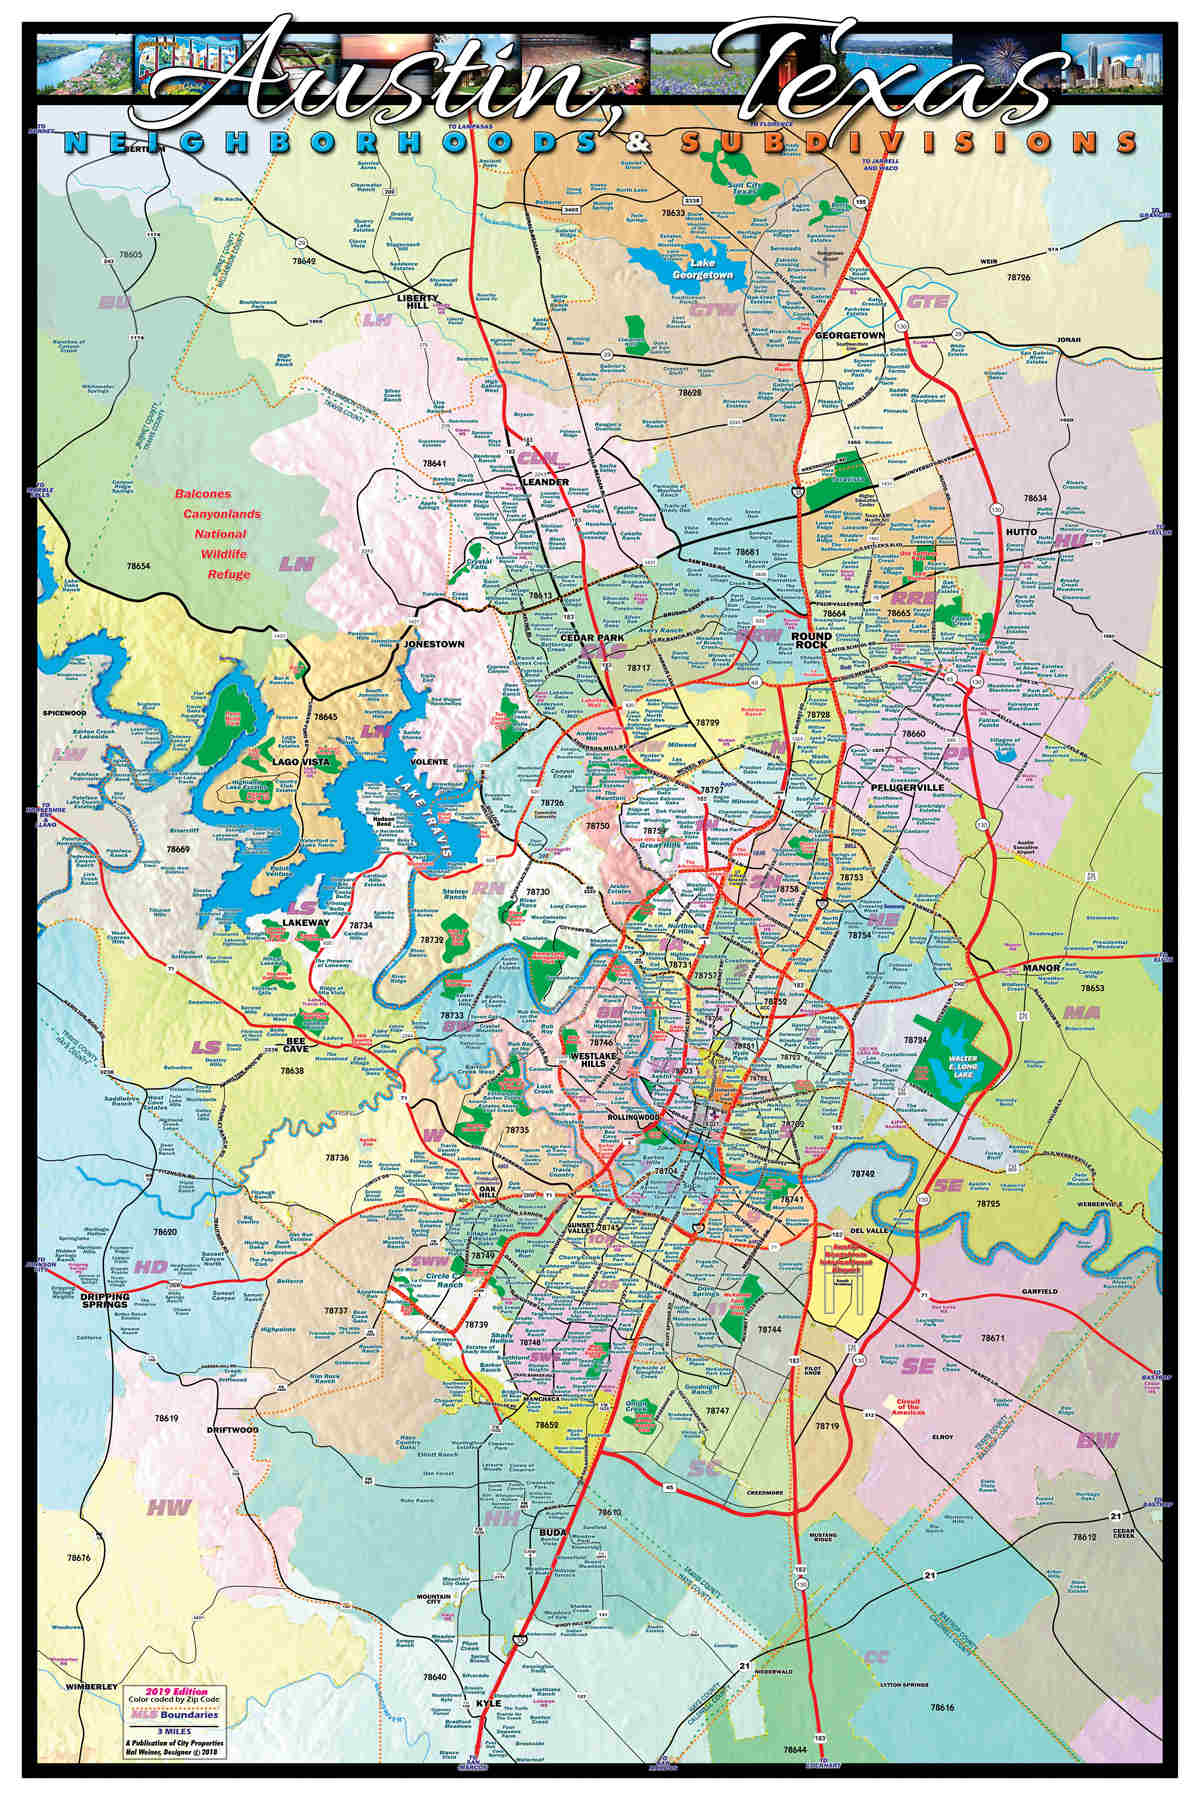 Austin Tx Subdivision Map Over 800 Neighborhoods And Subdivisions